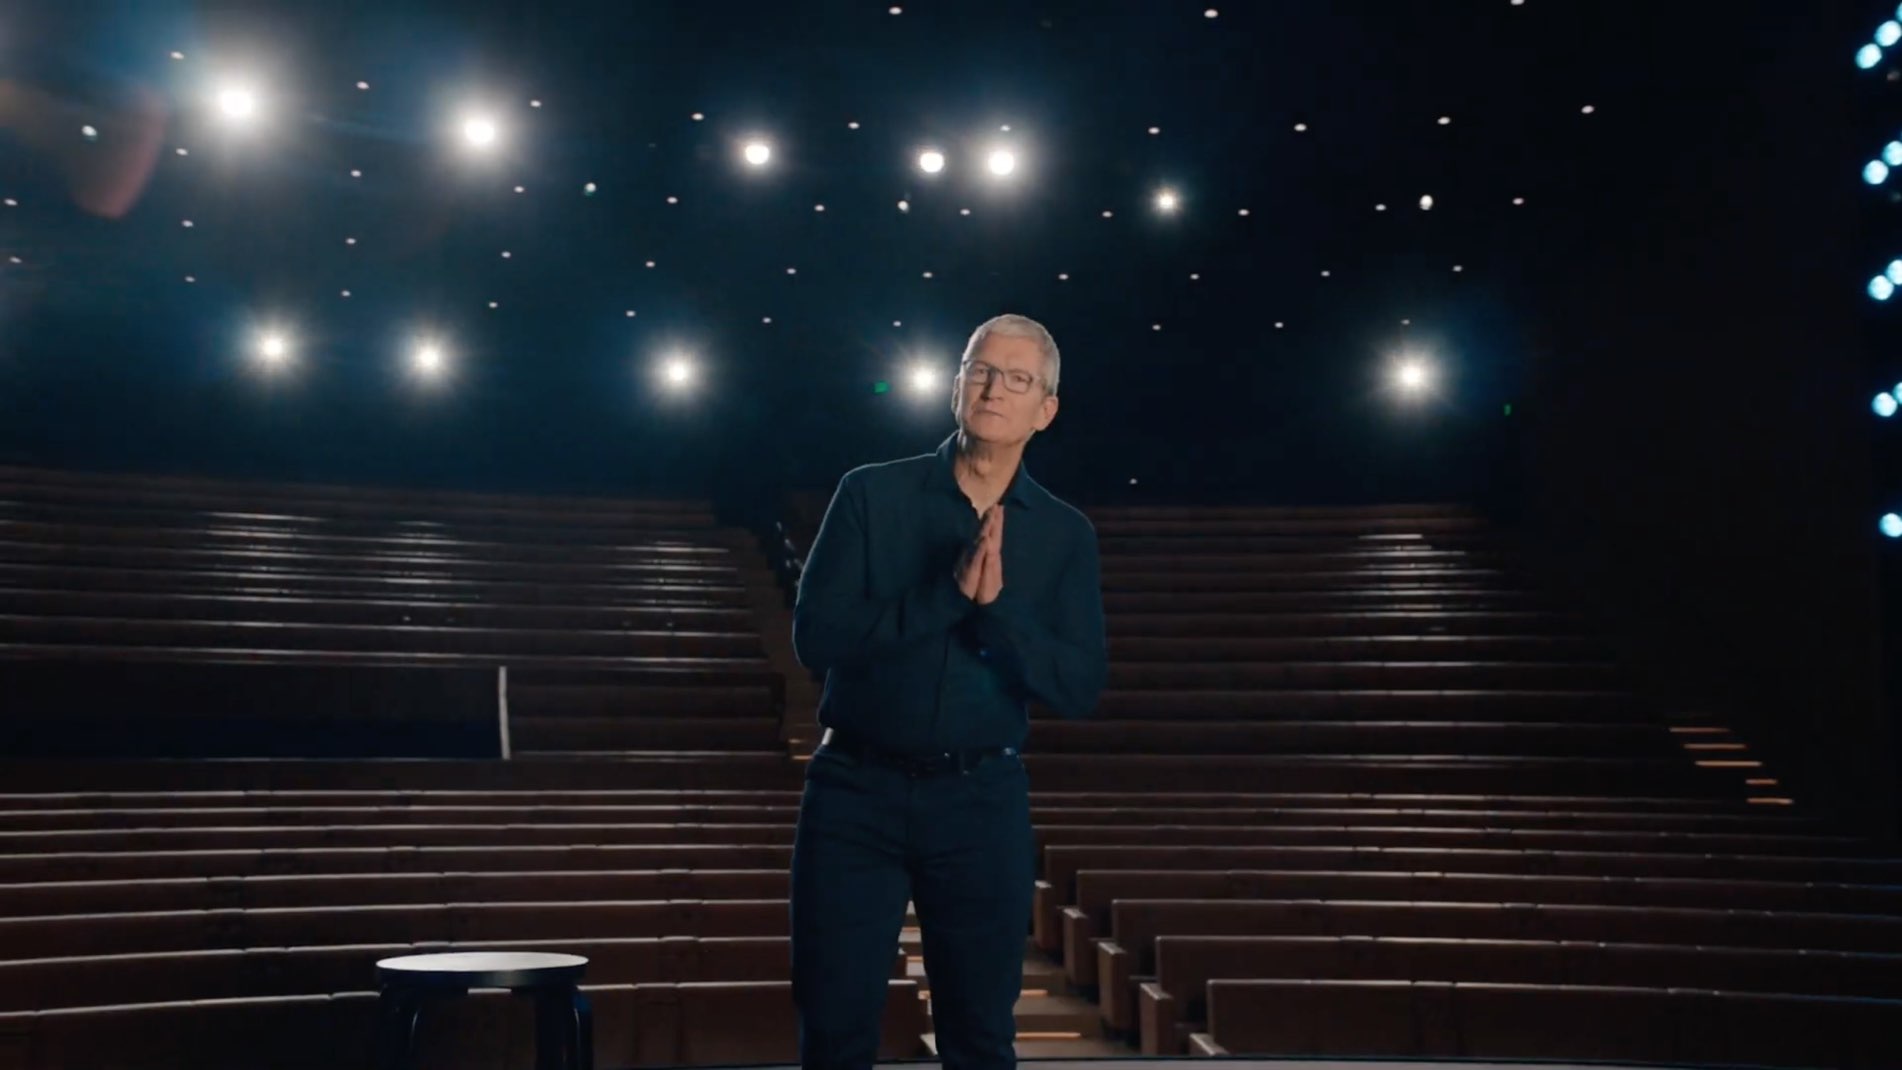 A still from an Apple event video featuring Tim Cook opening